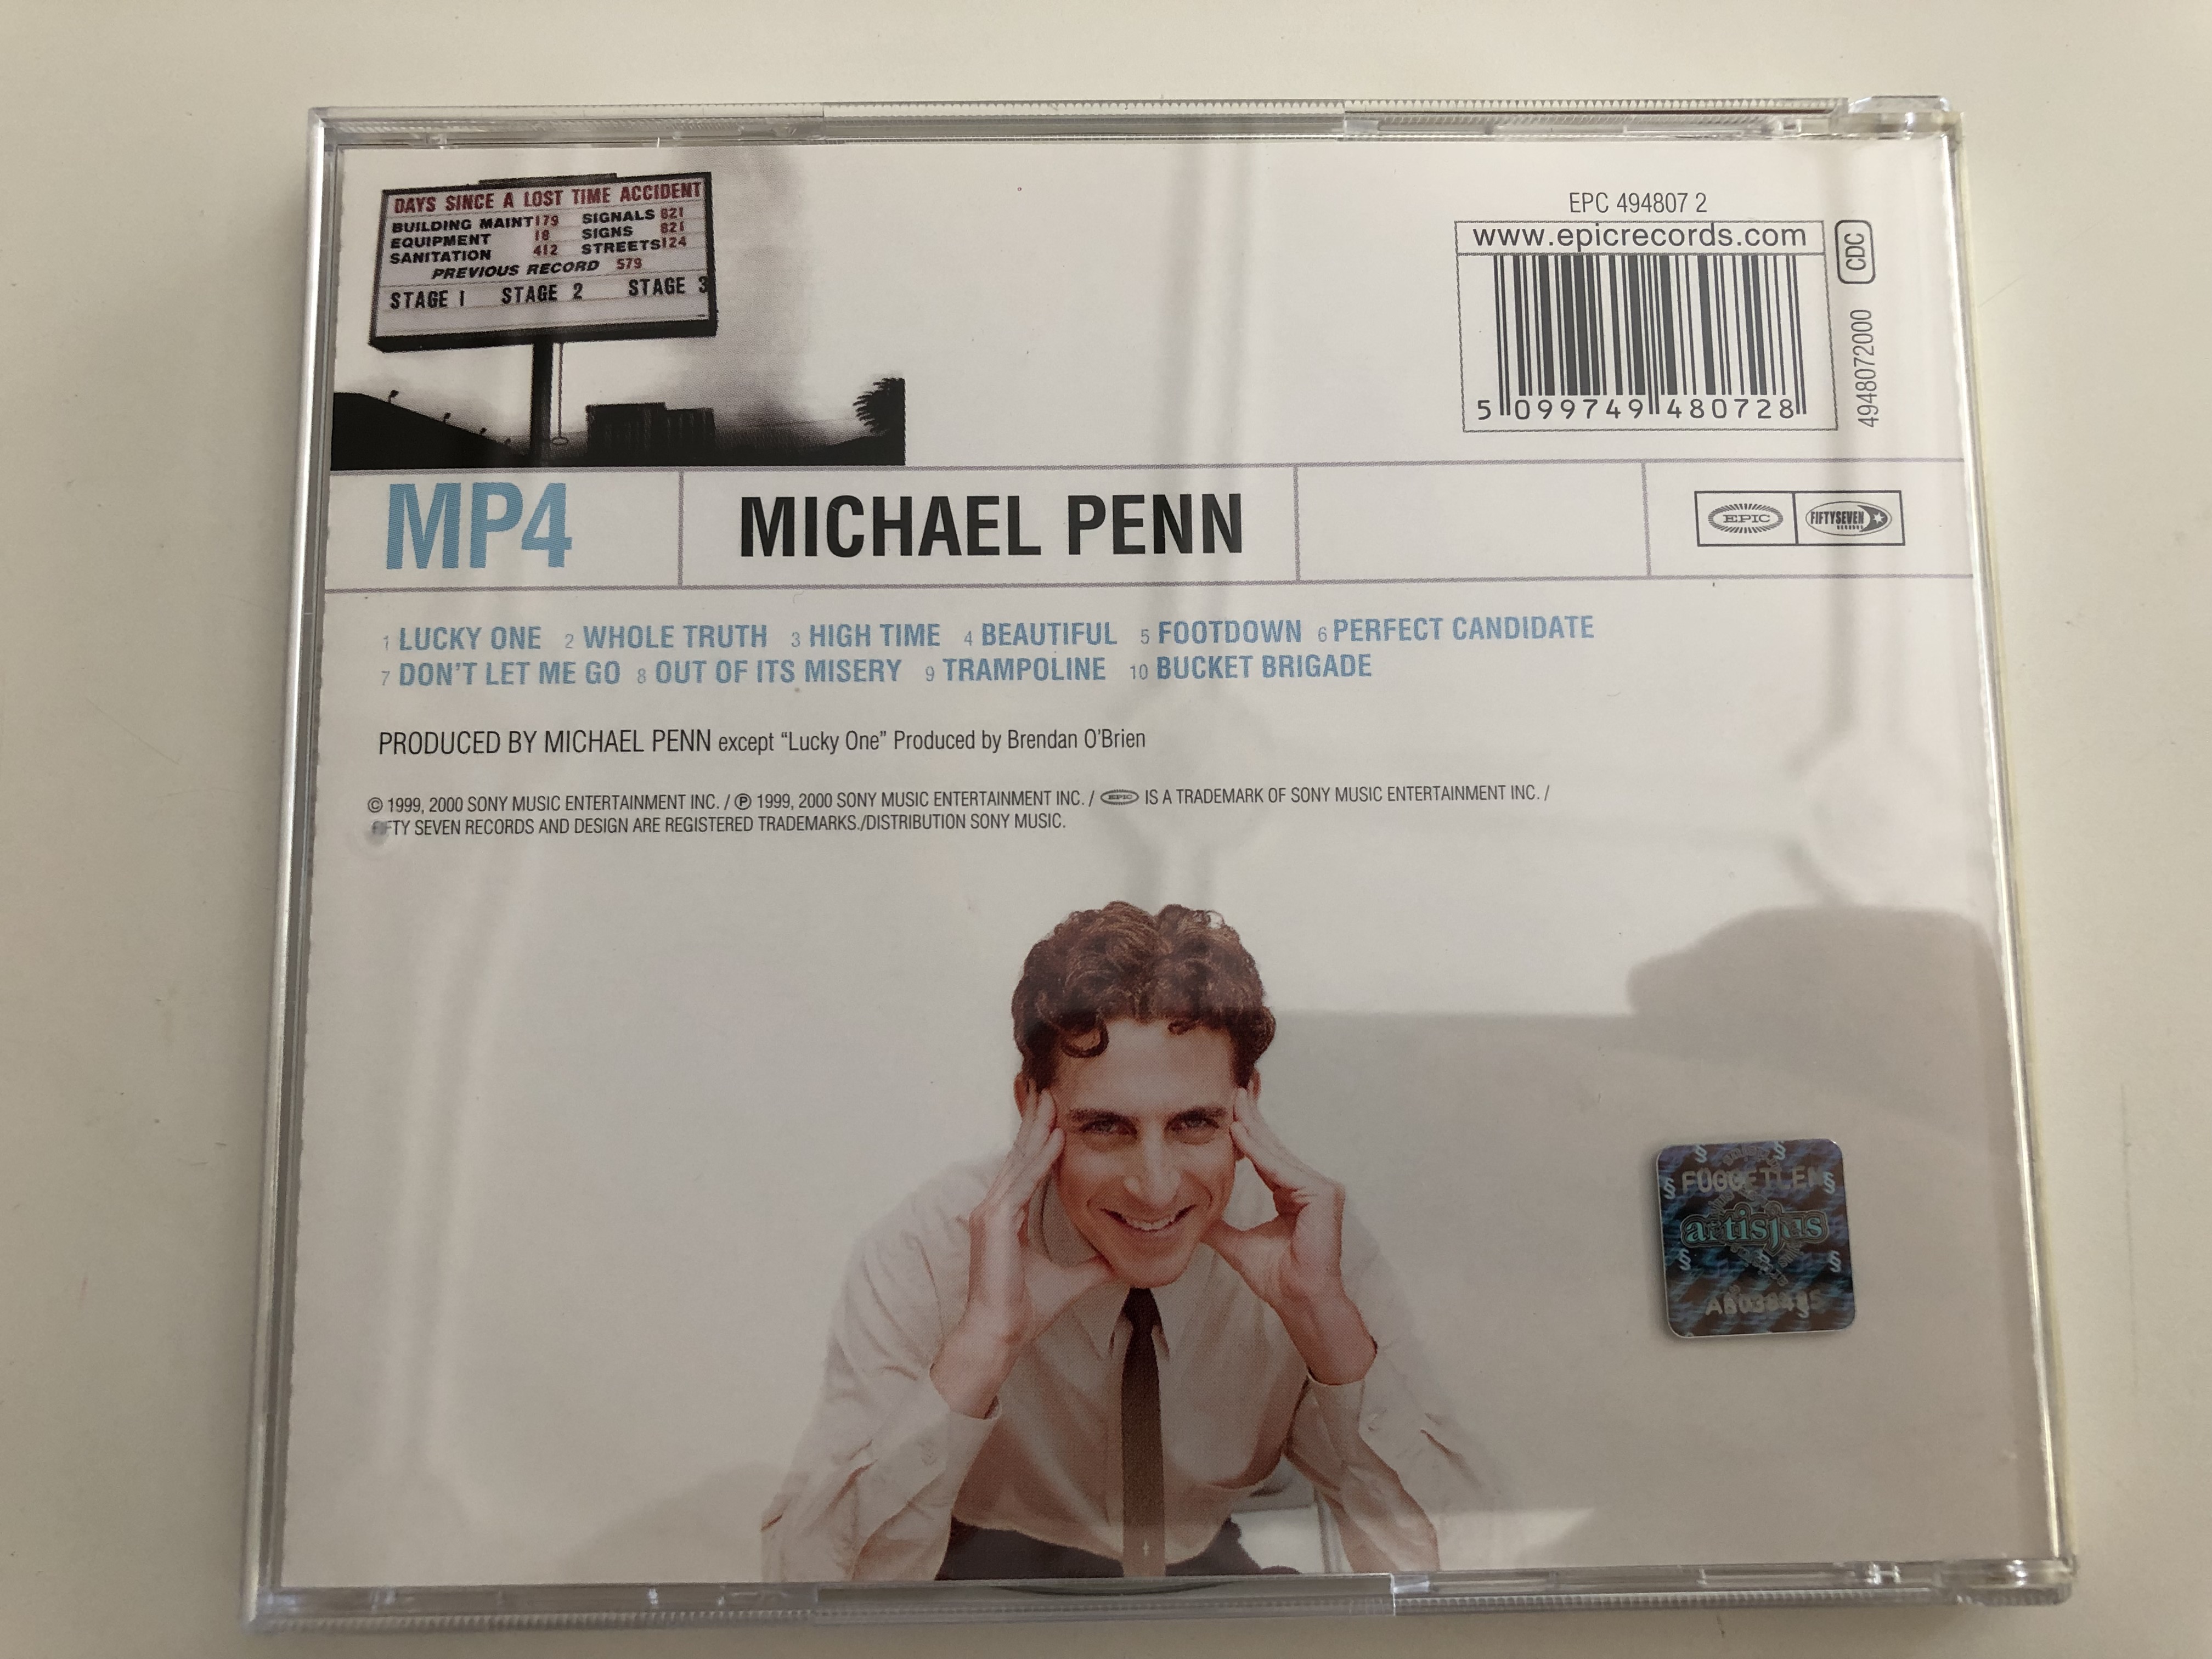 michael-penn-days-since-a-lost-time-accident-audio-cd-2000-mp4-epic-records-epc-4948072-6-.jpg